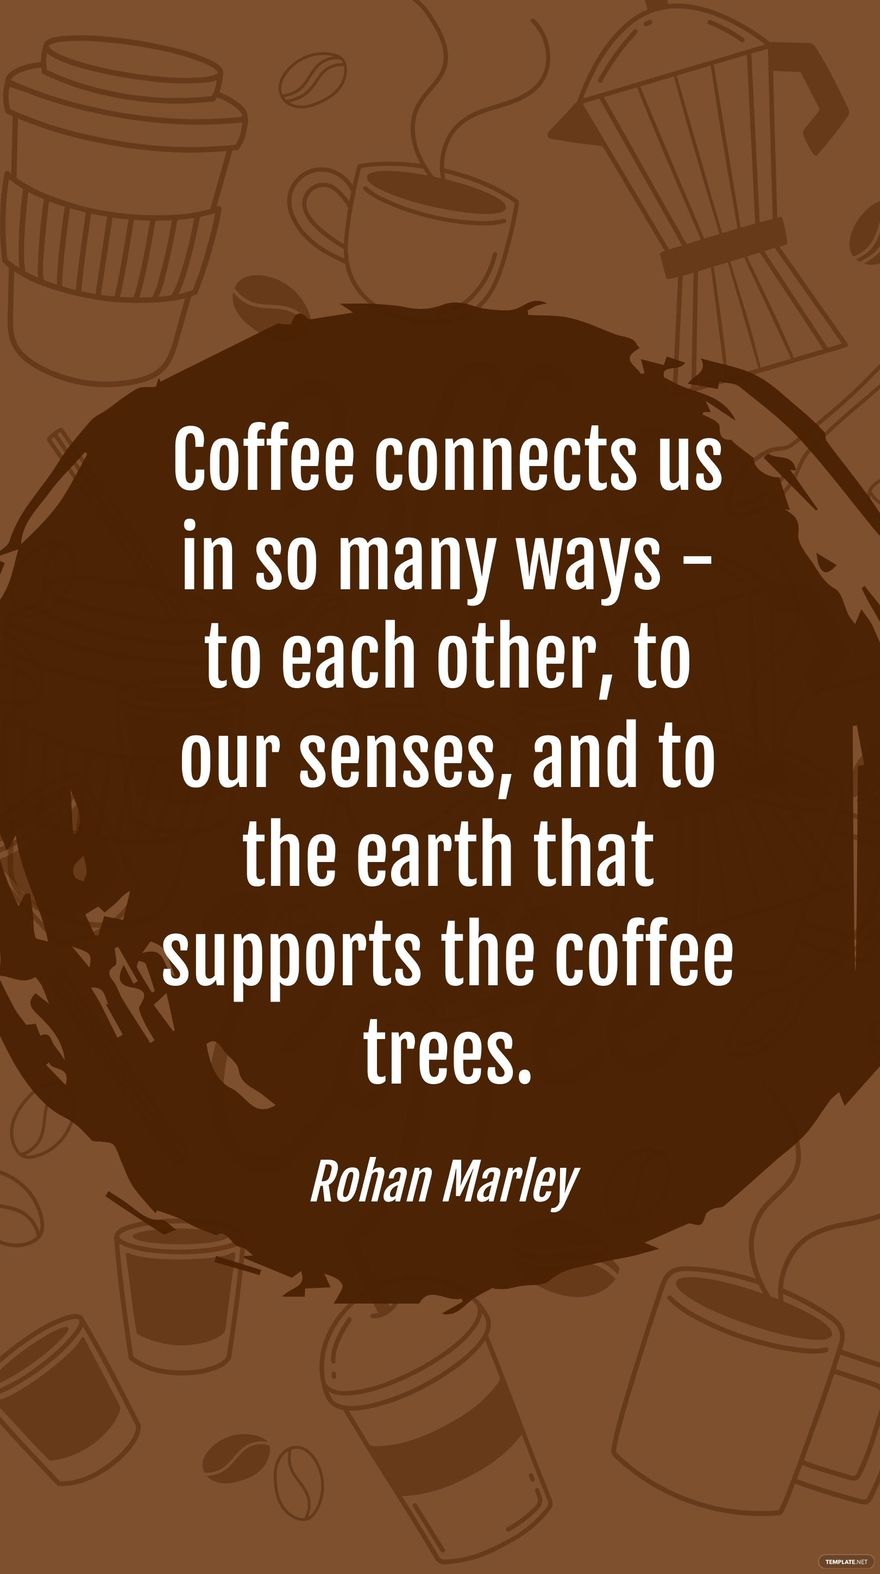 Rohan Marley - Coffee connects us in so many ways - to each other, to our senses, and to the earth that supports the coffee trees. in JPG